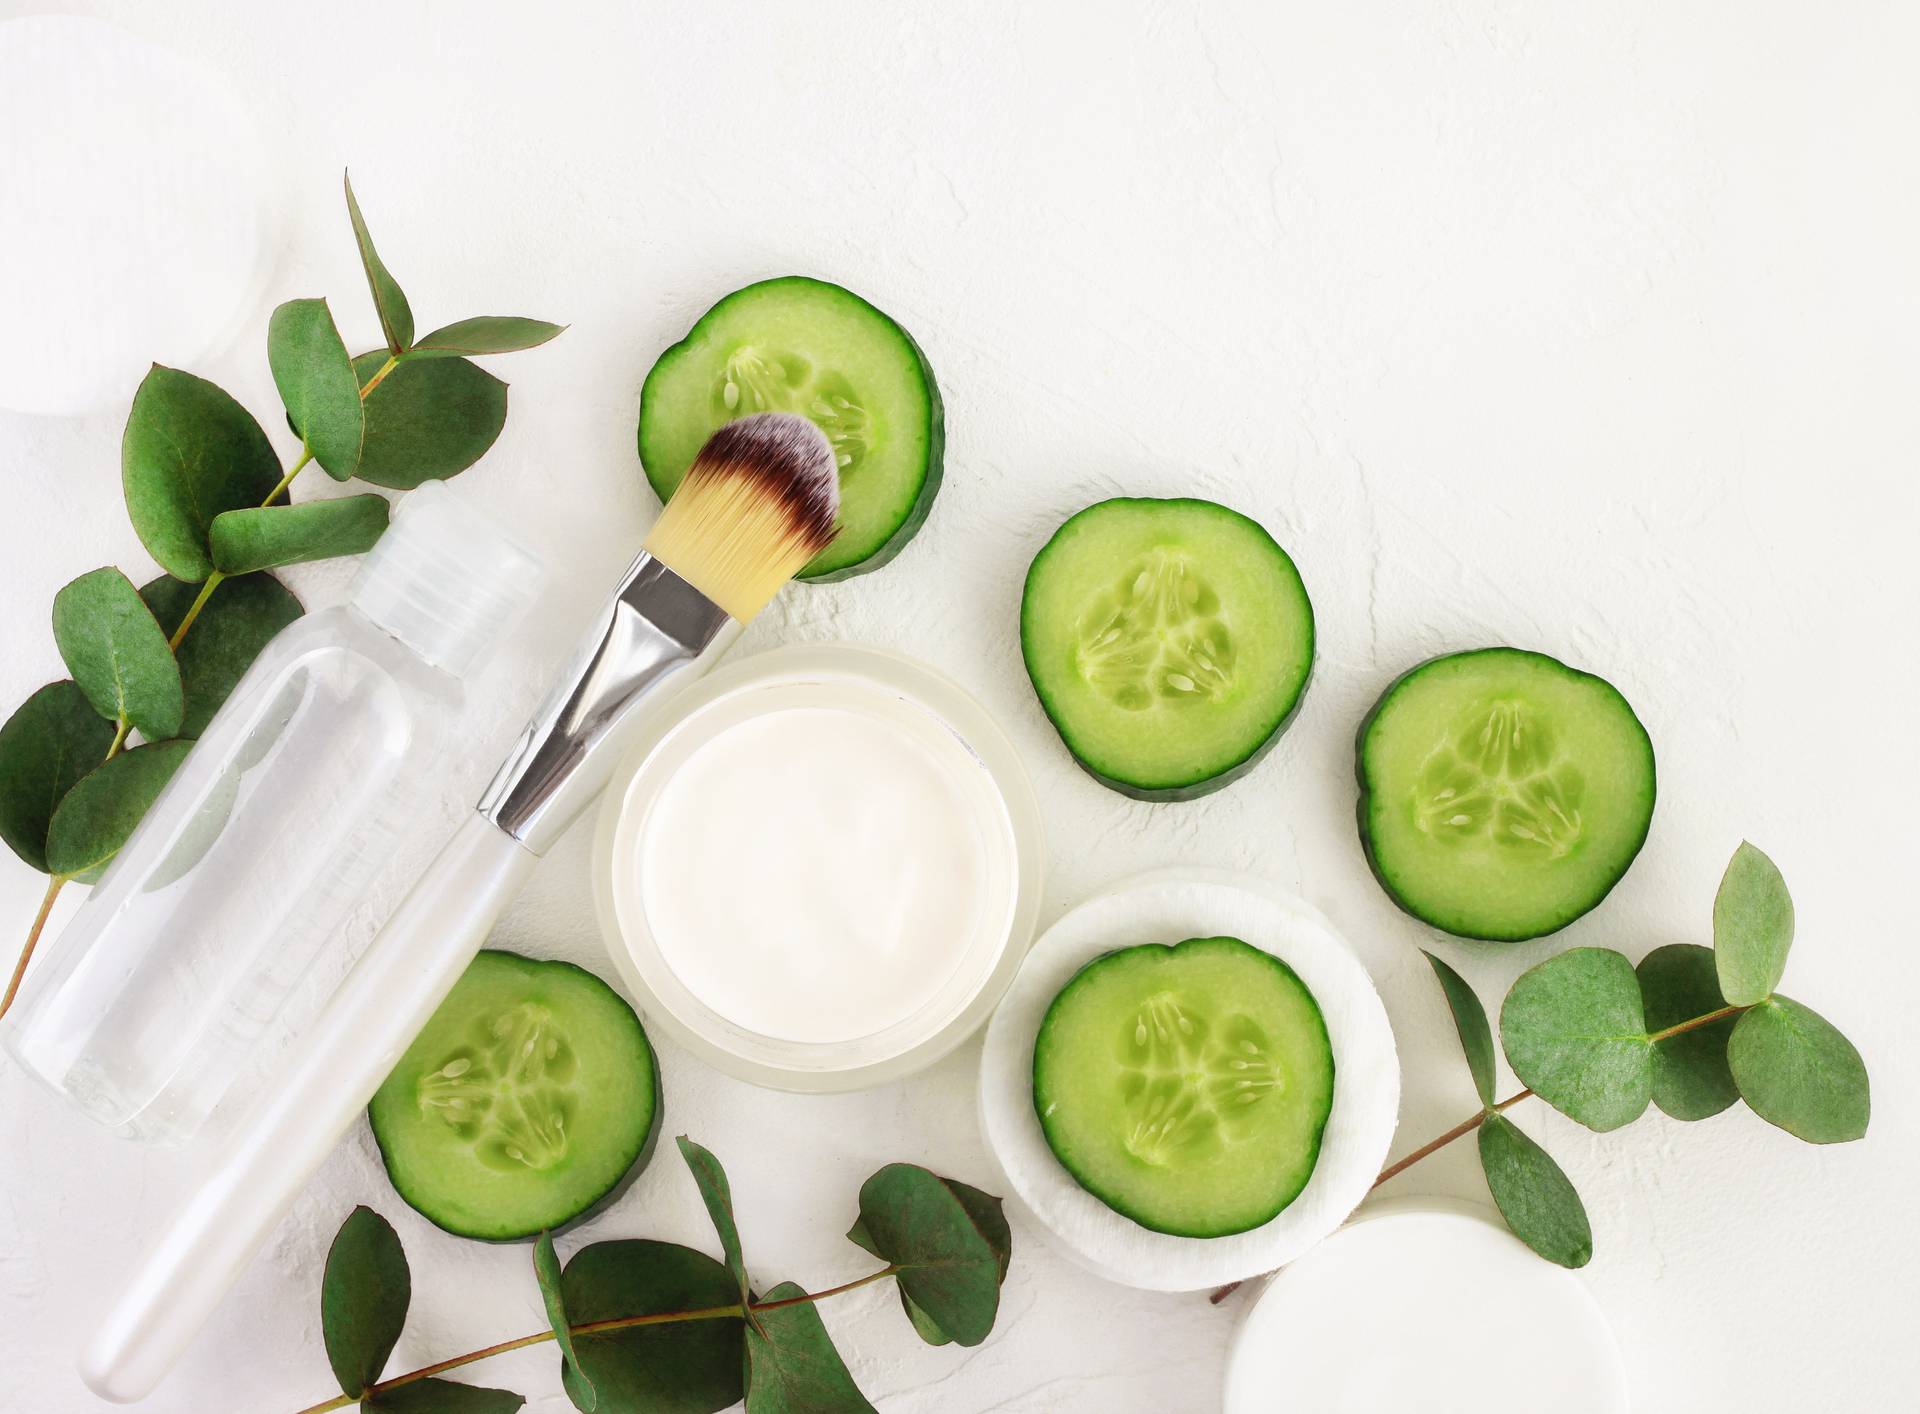 Cucumber slices, cosmetic cream jar and tonic mineral water in bottle, fresh green eucalyptus leaves, viewed above white background.